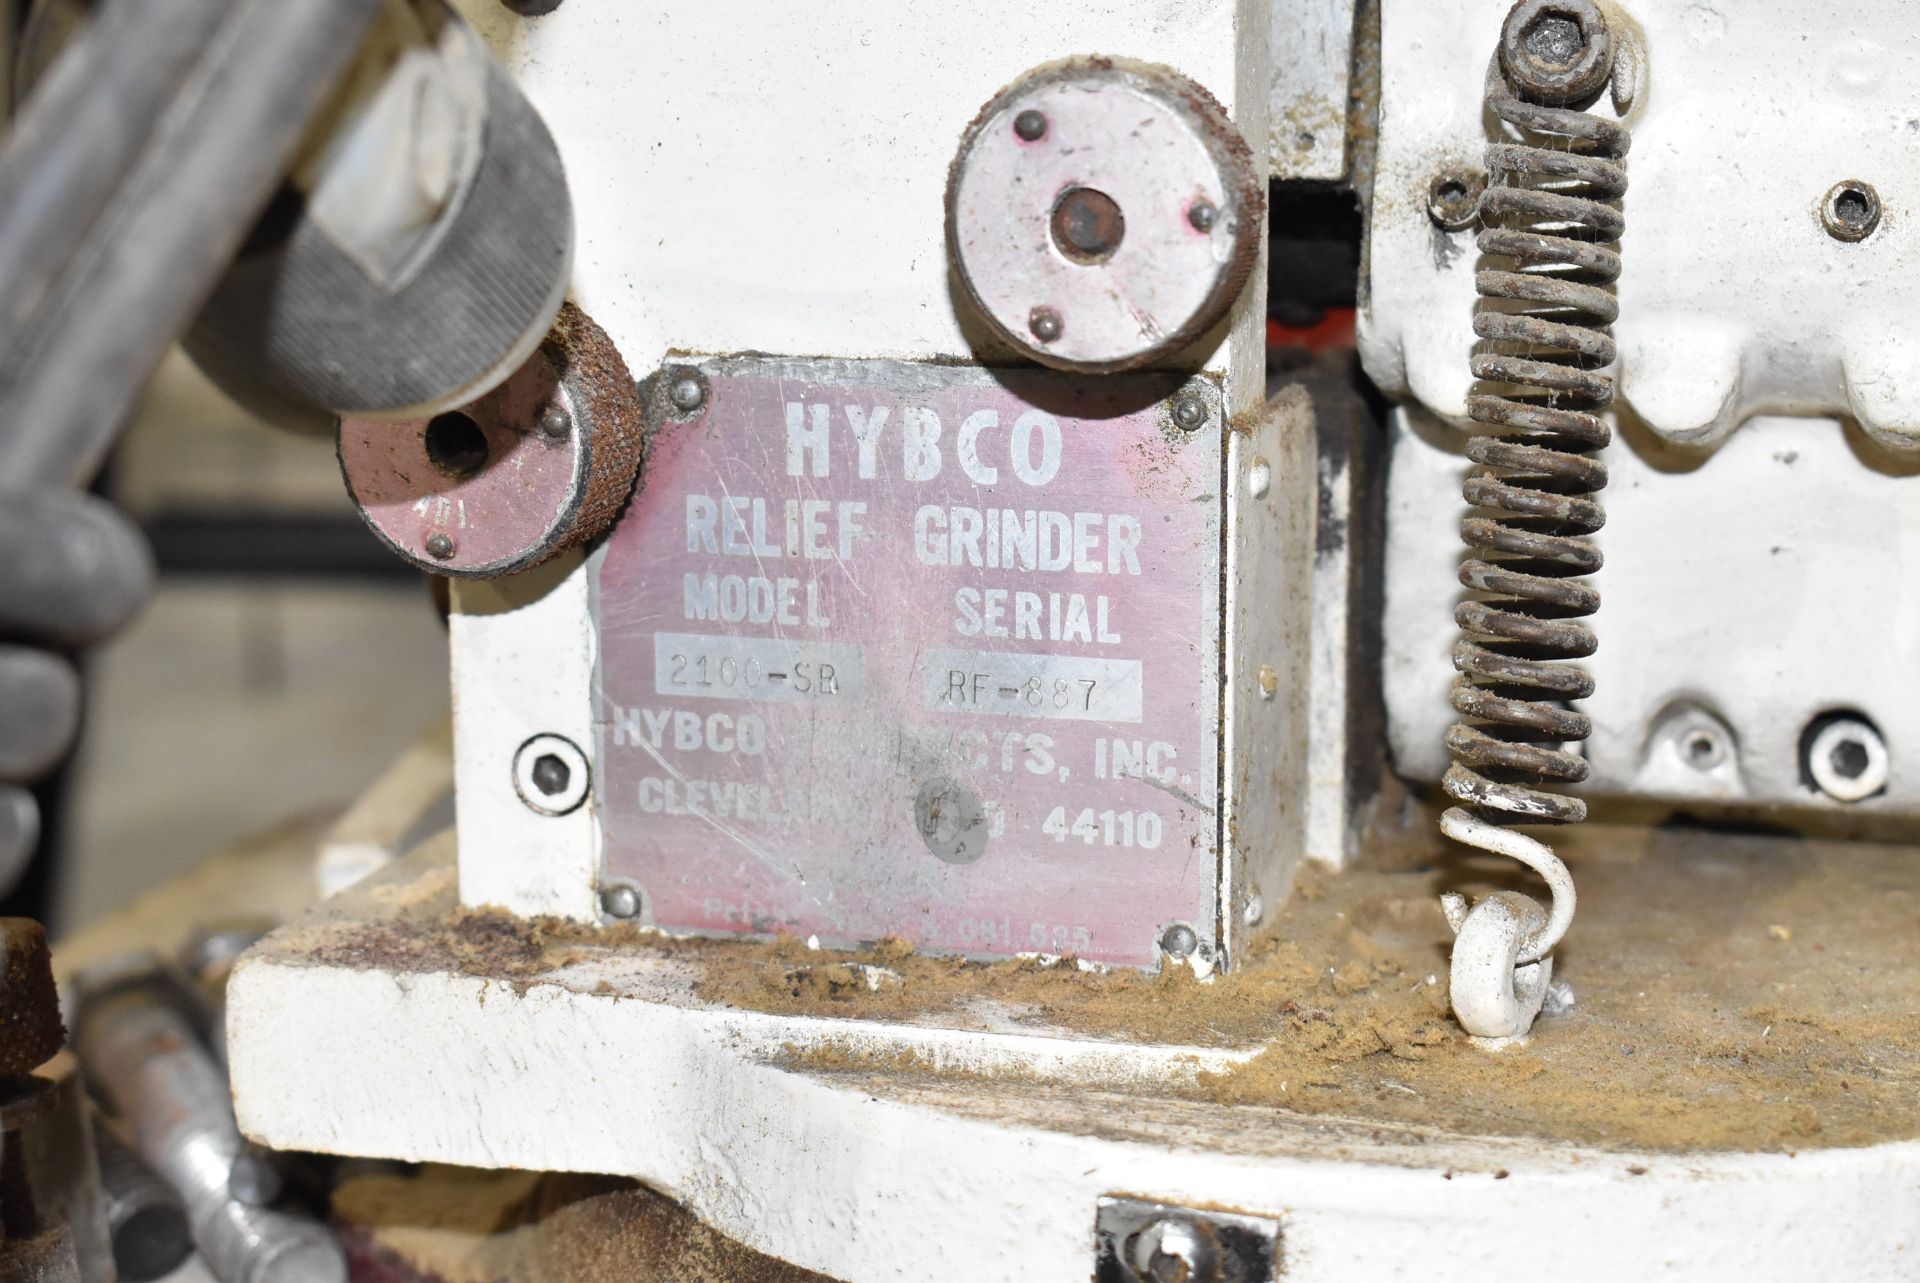 HYBCO 2100-SB RELIEF GRINDER ATTACHMENT, S/N RF-887 - Image 2 of 5